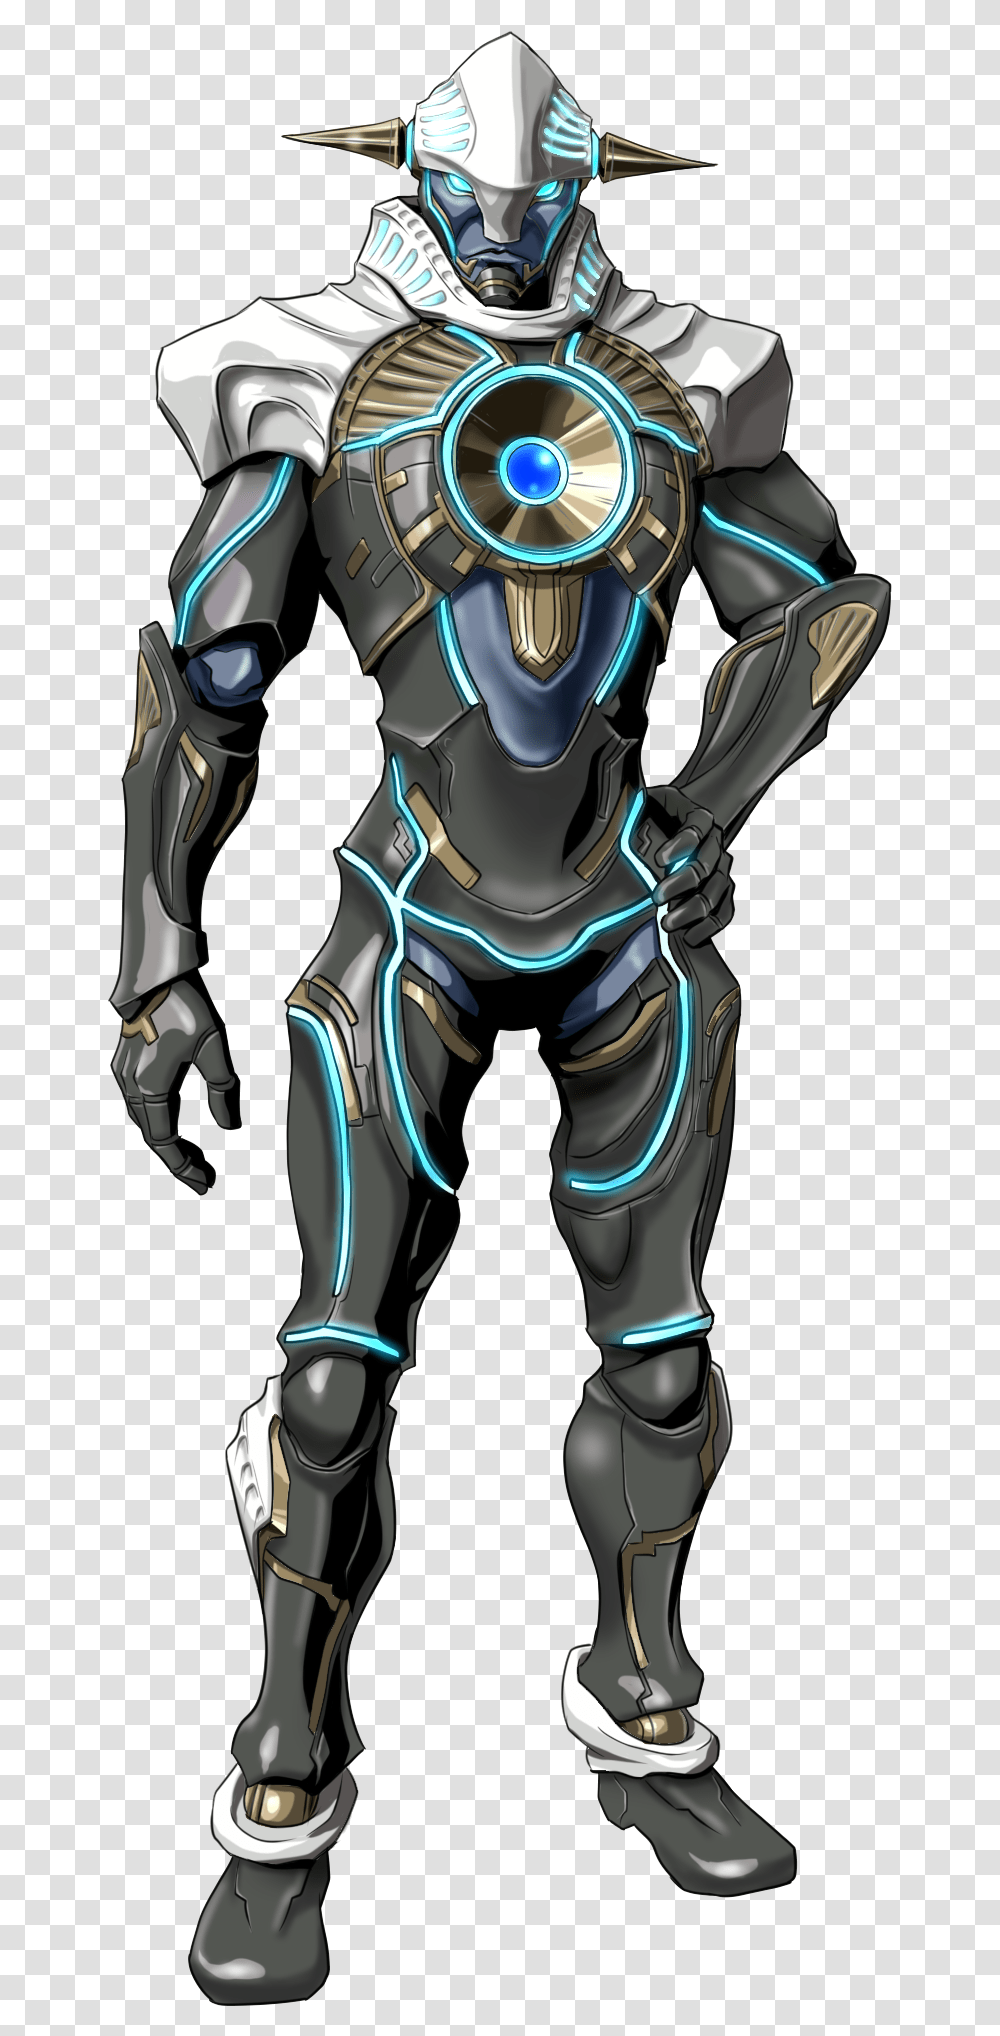 Man In Futuristic Armor Xenoblade 2 Common Blades, Toy, Costume, Robot Transparent Png